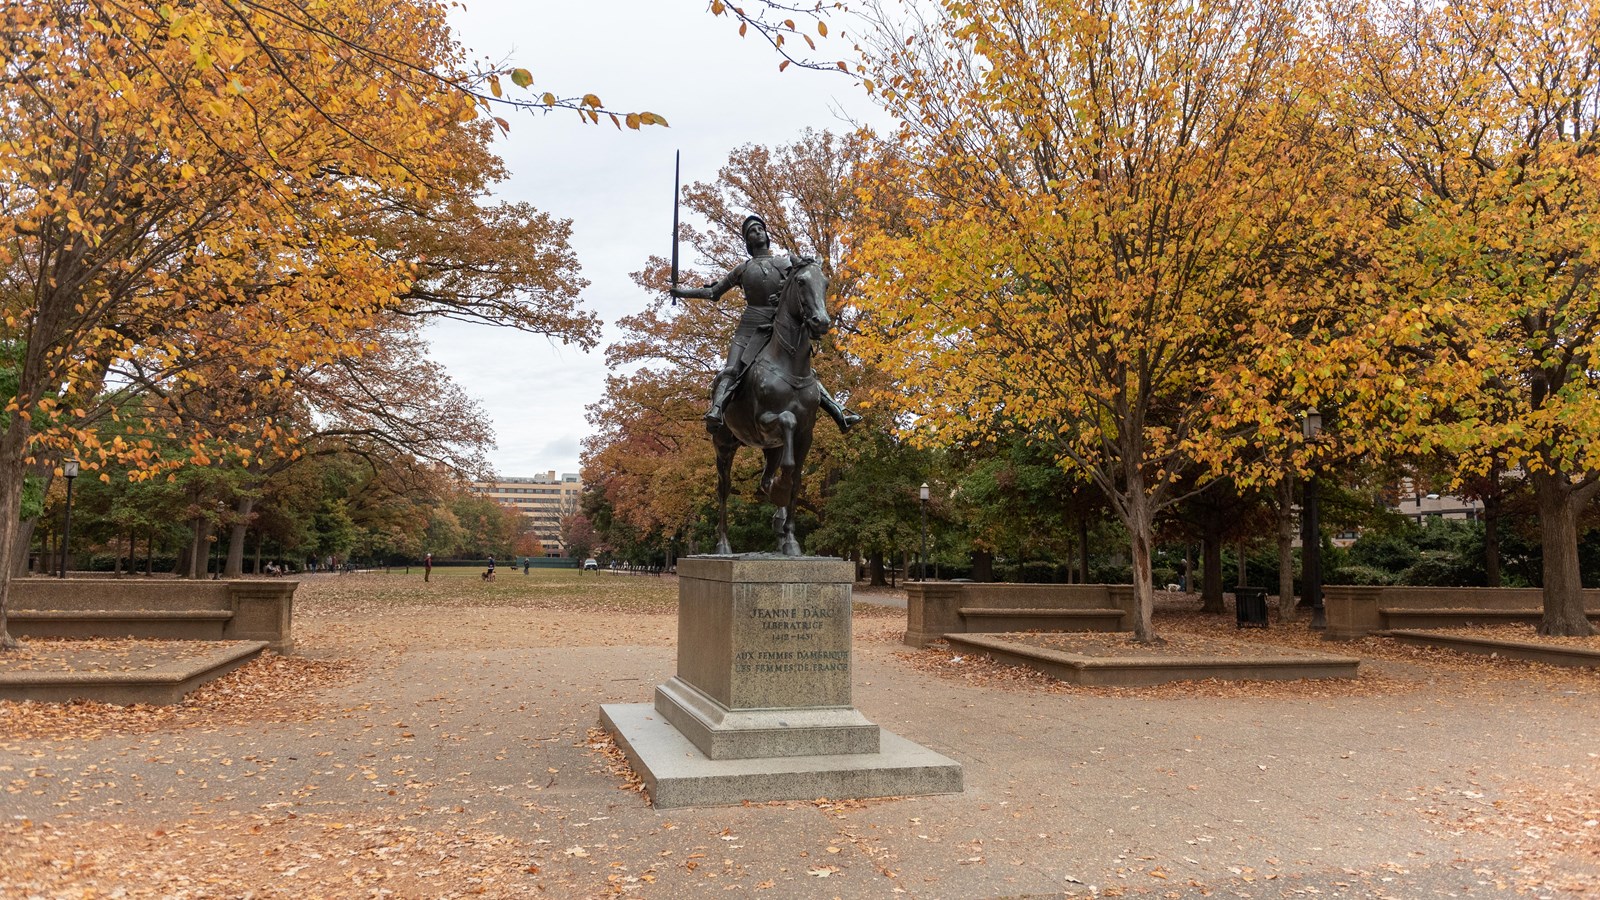 A large statue of Joan of Arc in a plaza surrounded by trees with orange leaves. 